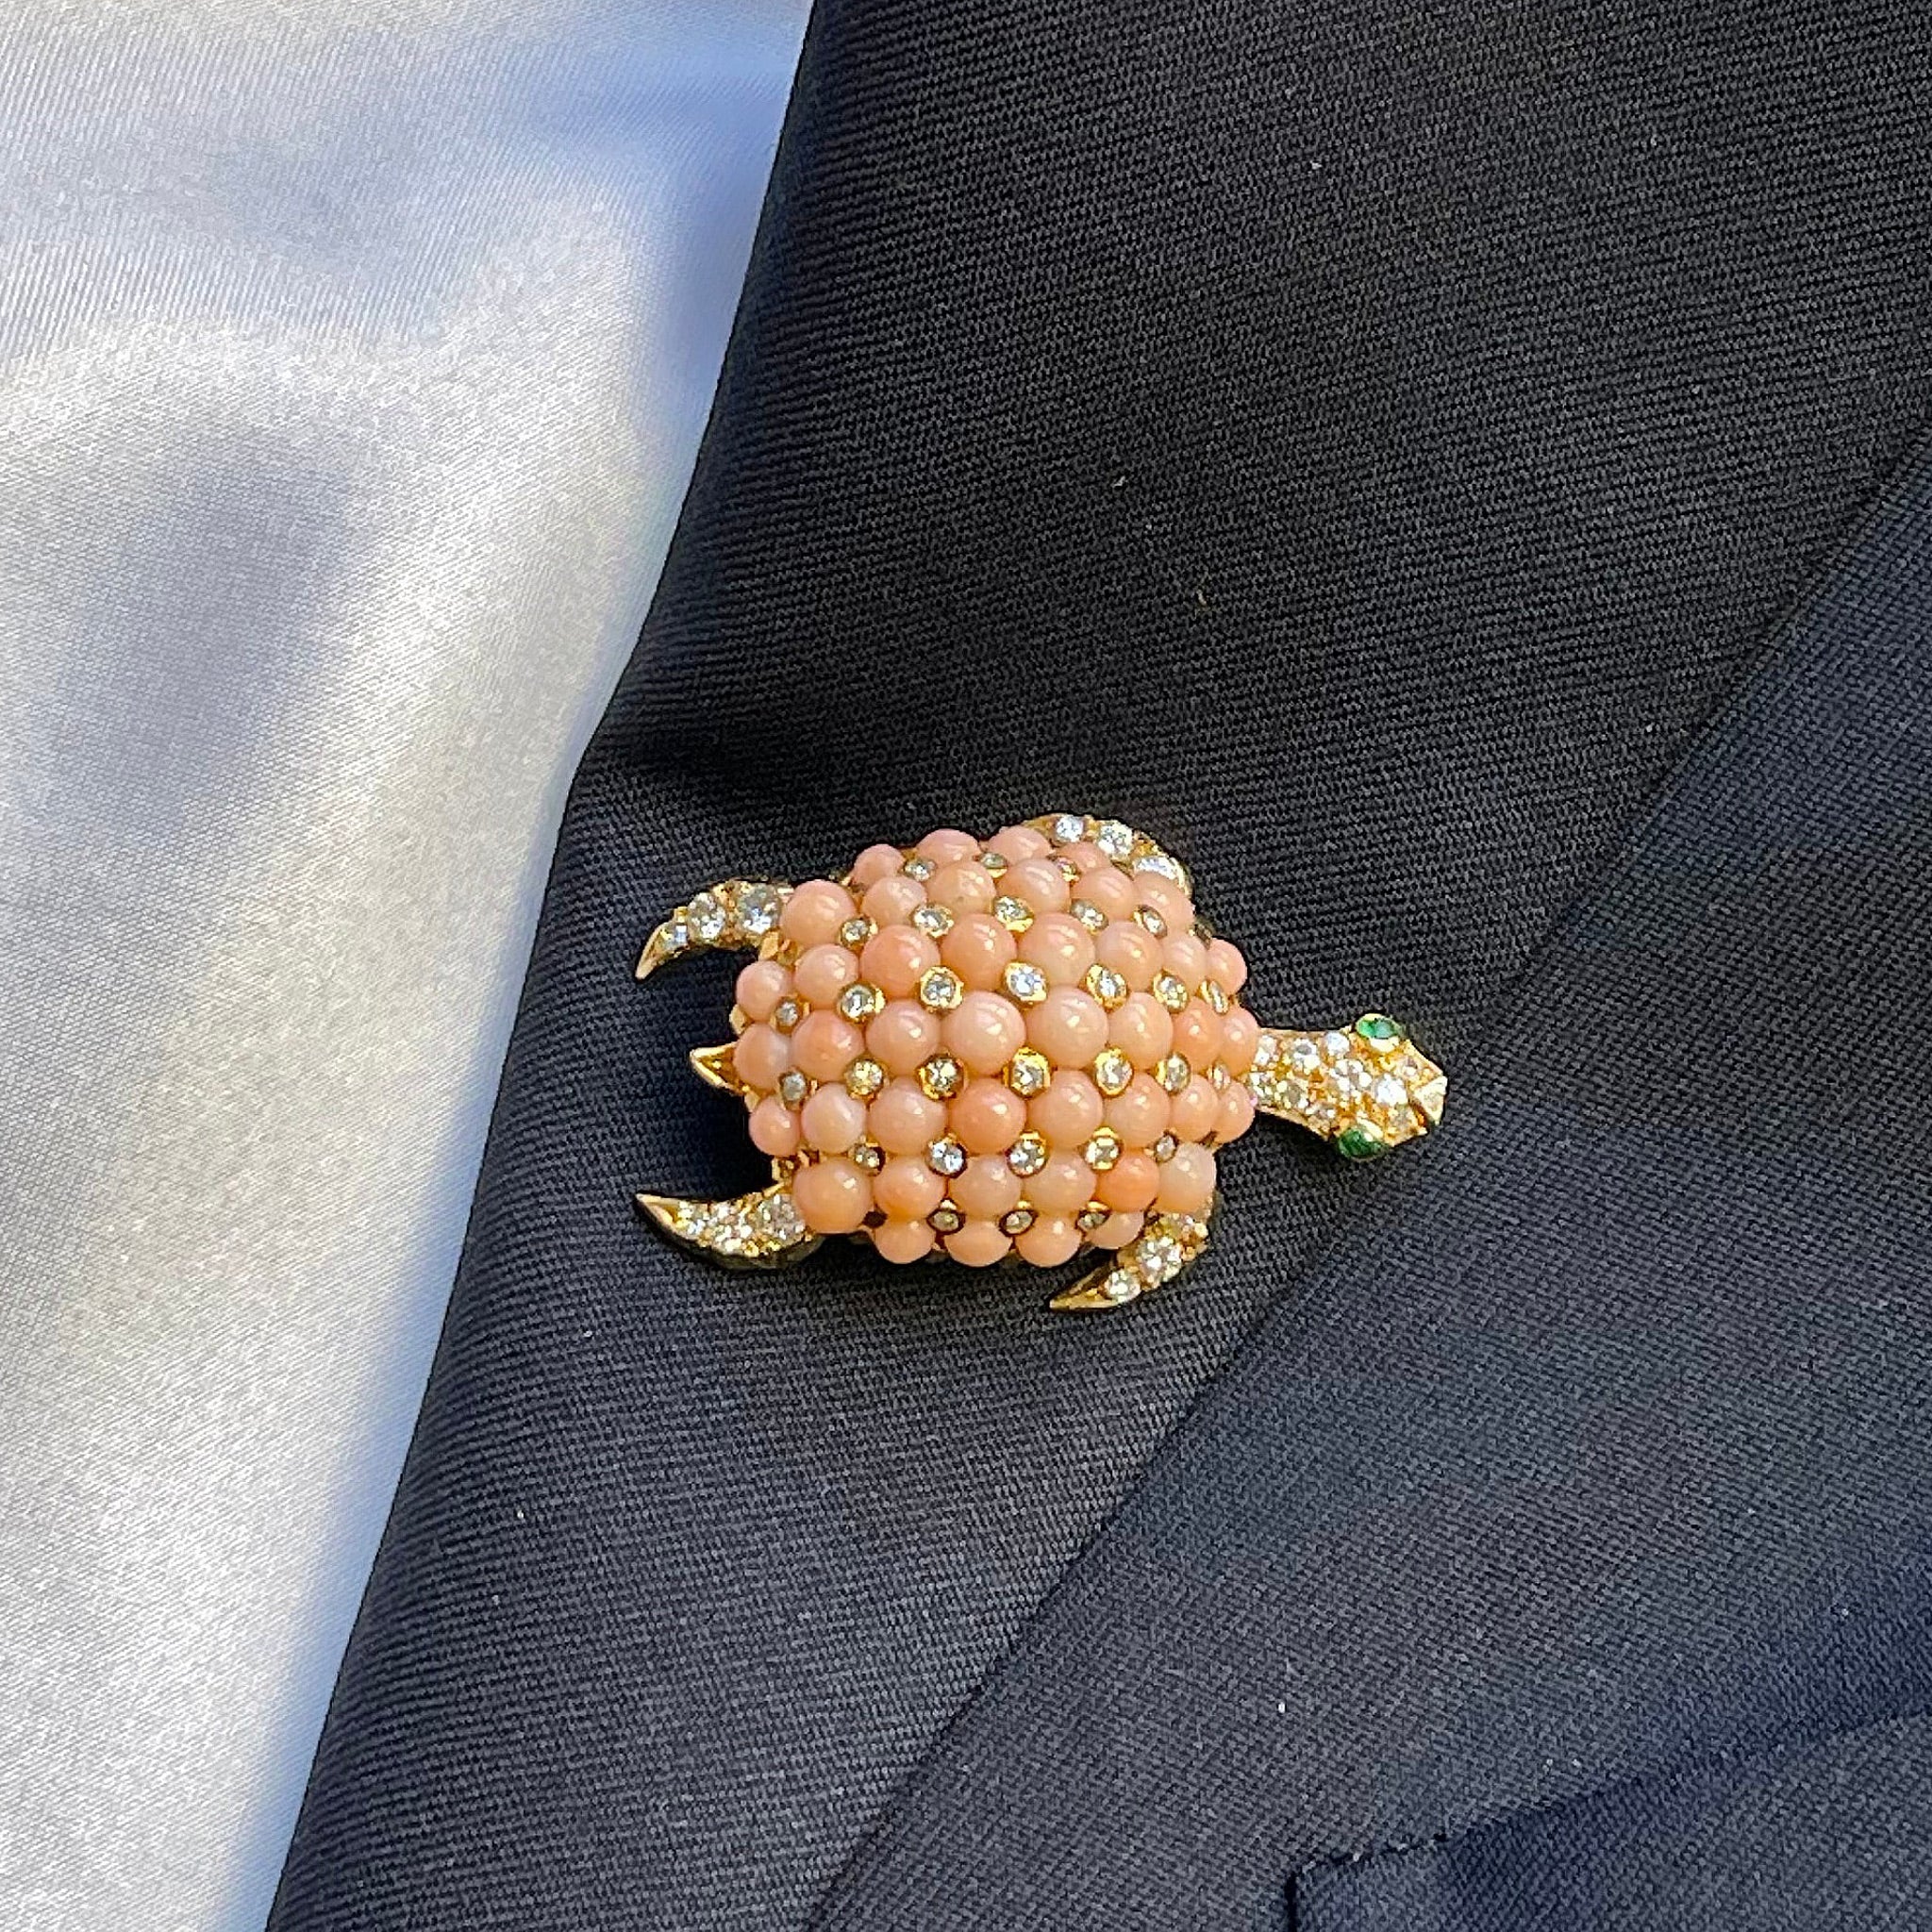 Coral and Diamond Turtle Brooch